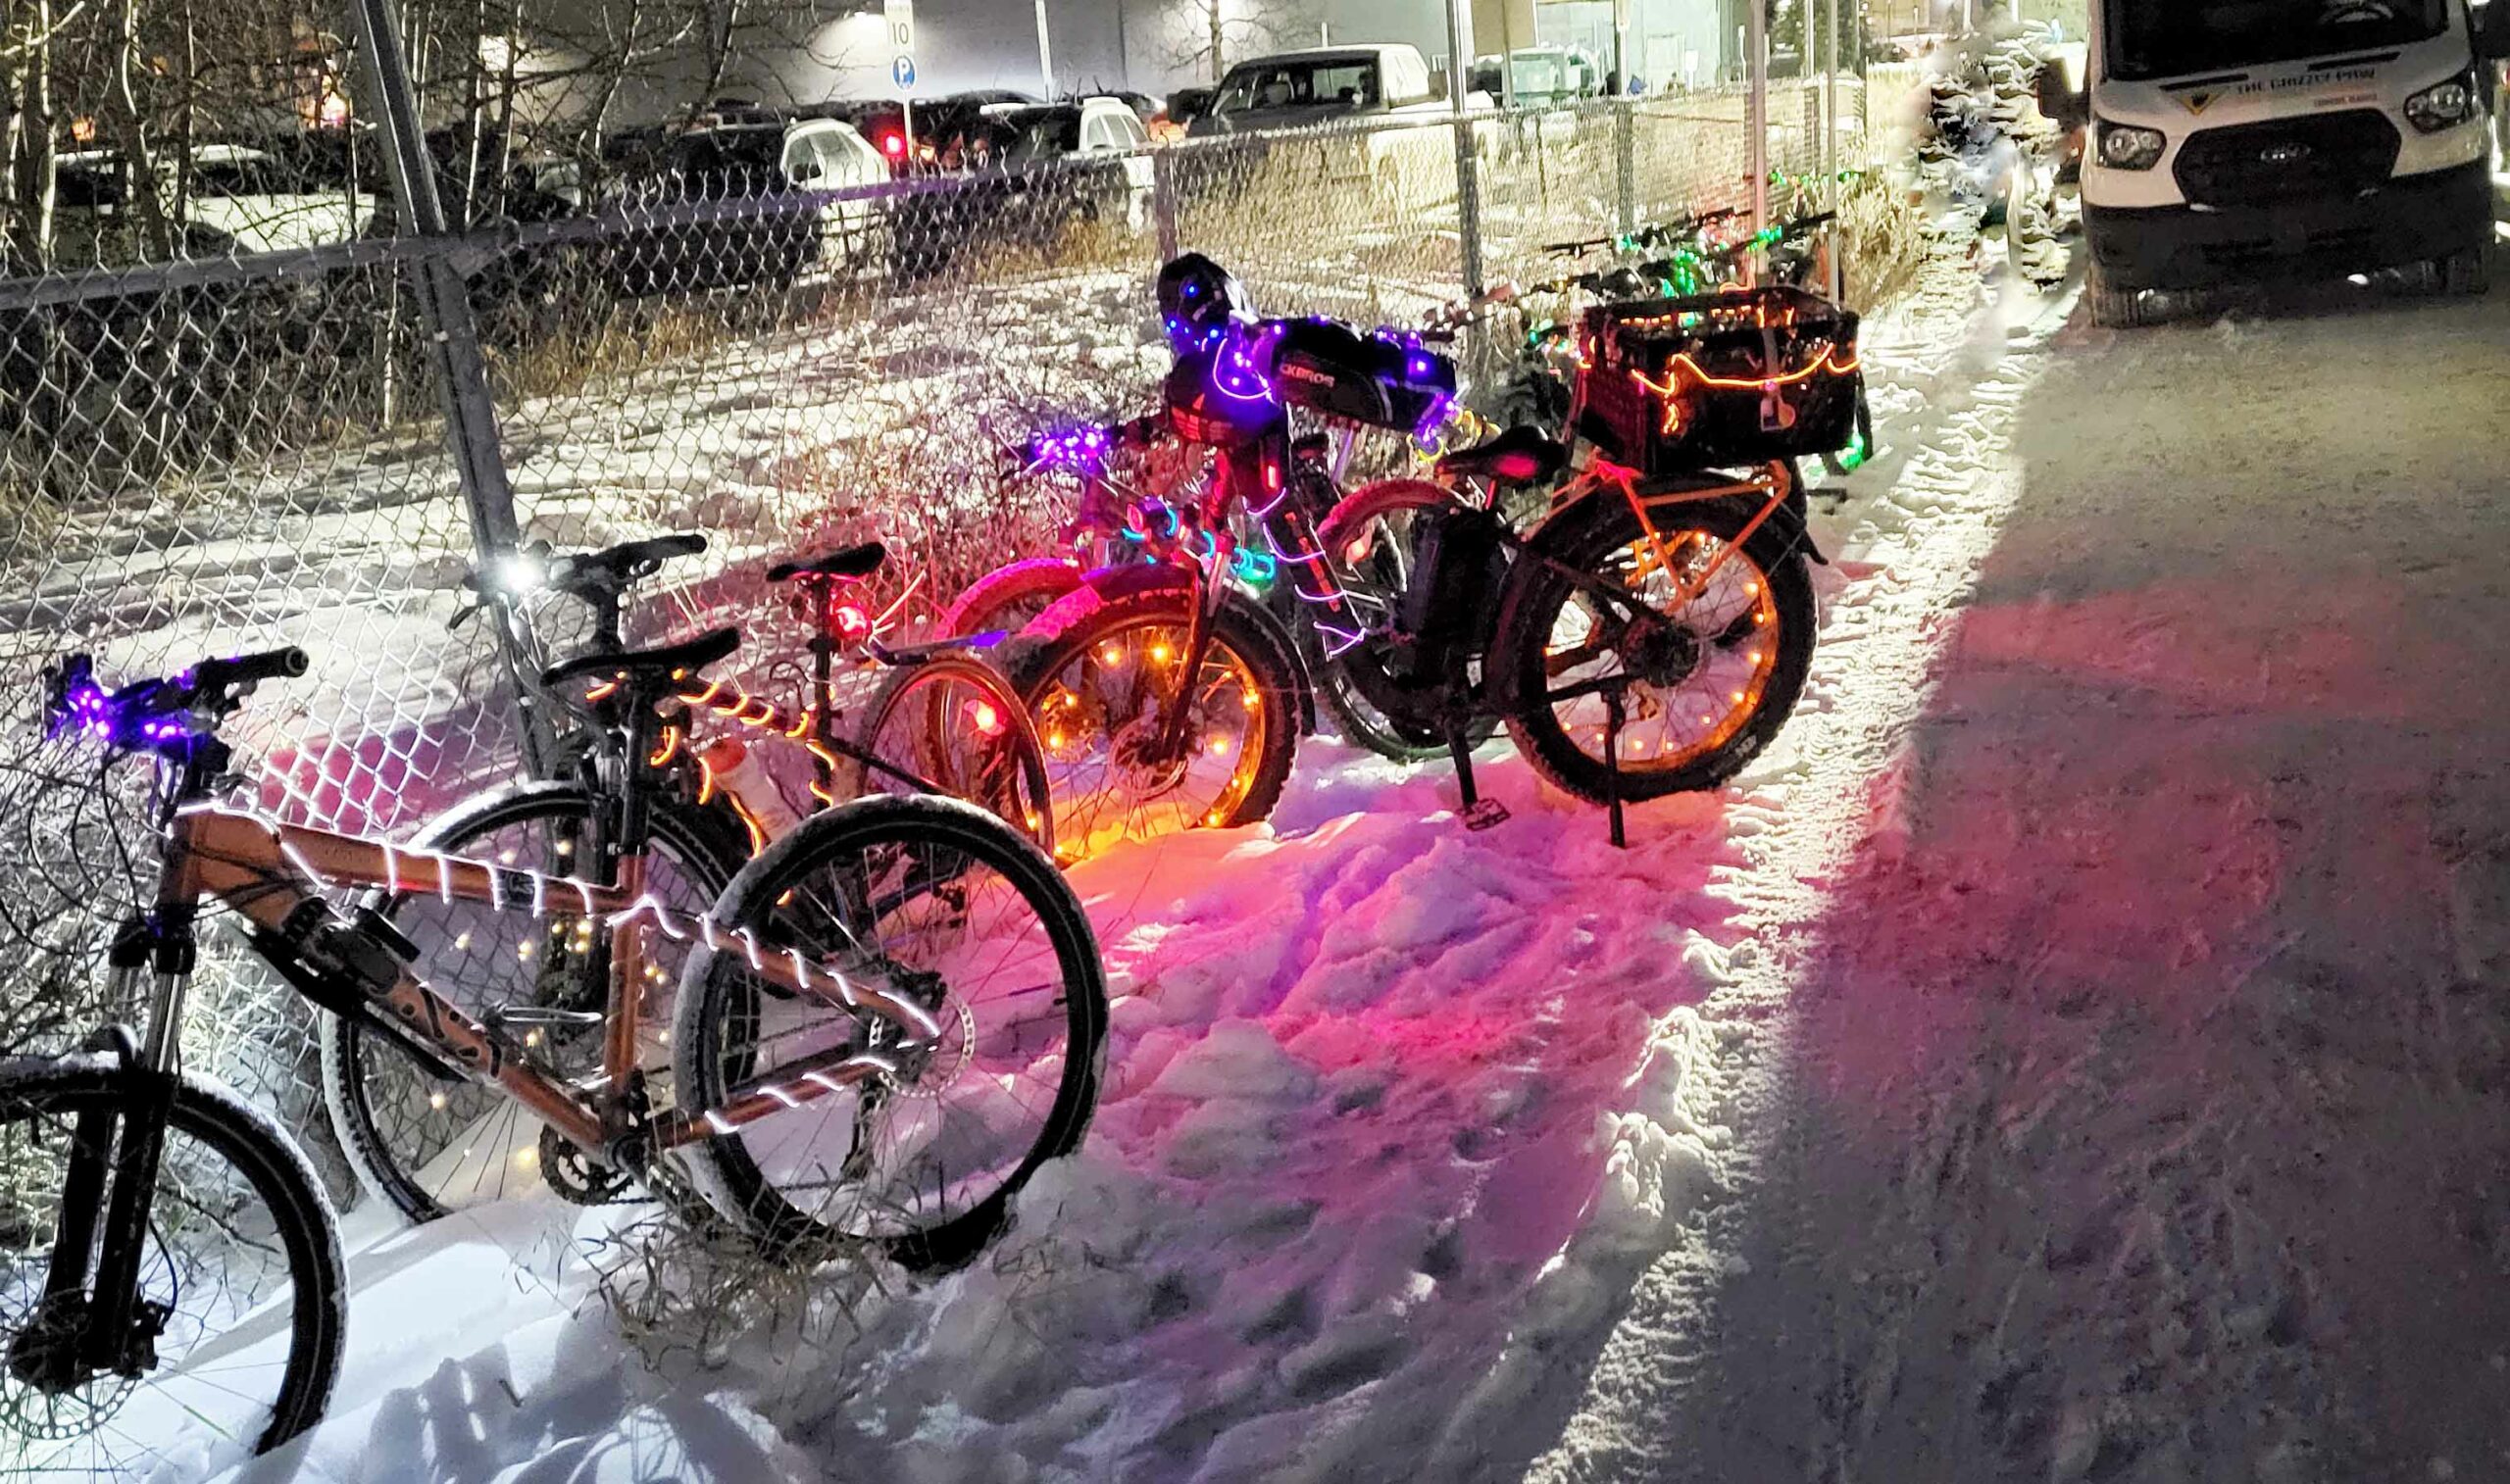 The decorated bikes lined up at the Holiday Train were a hit with people waiting for the show